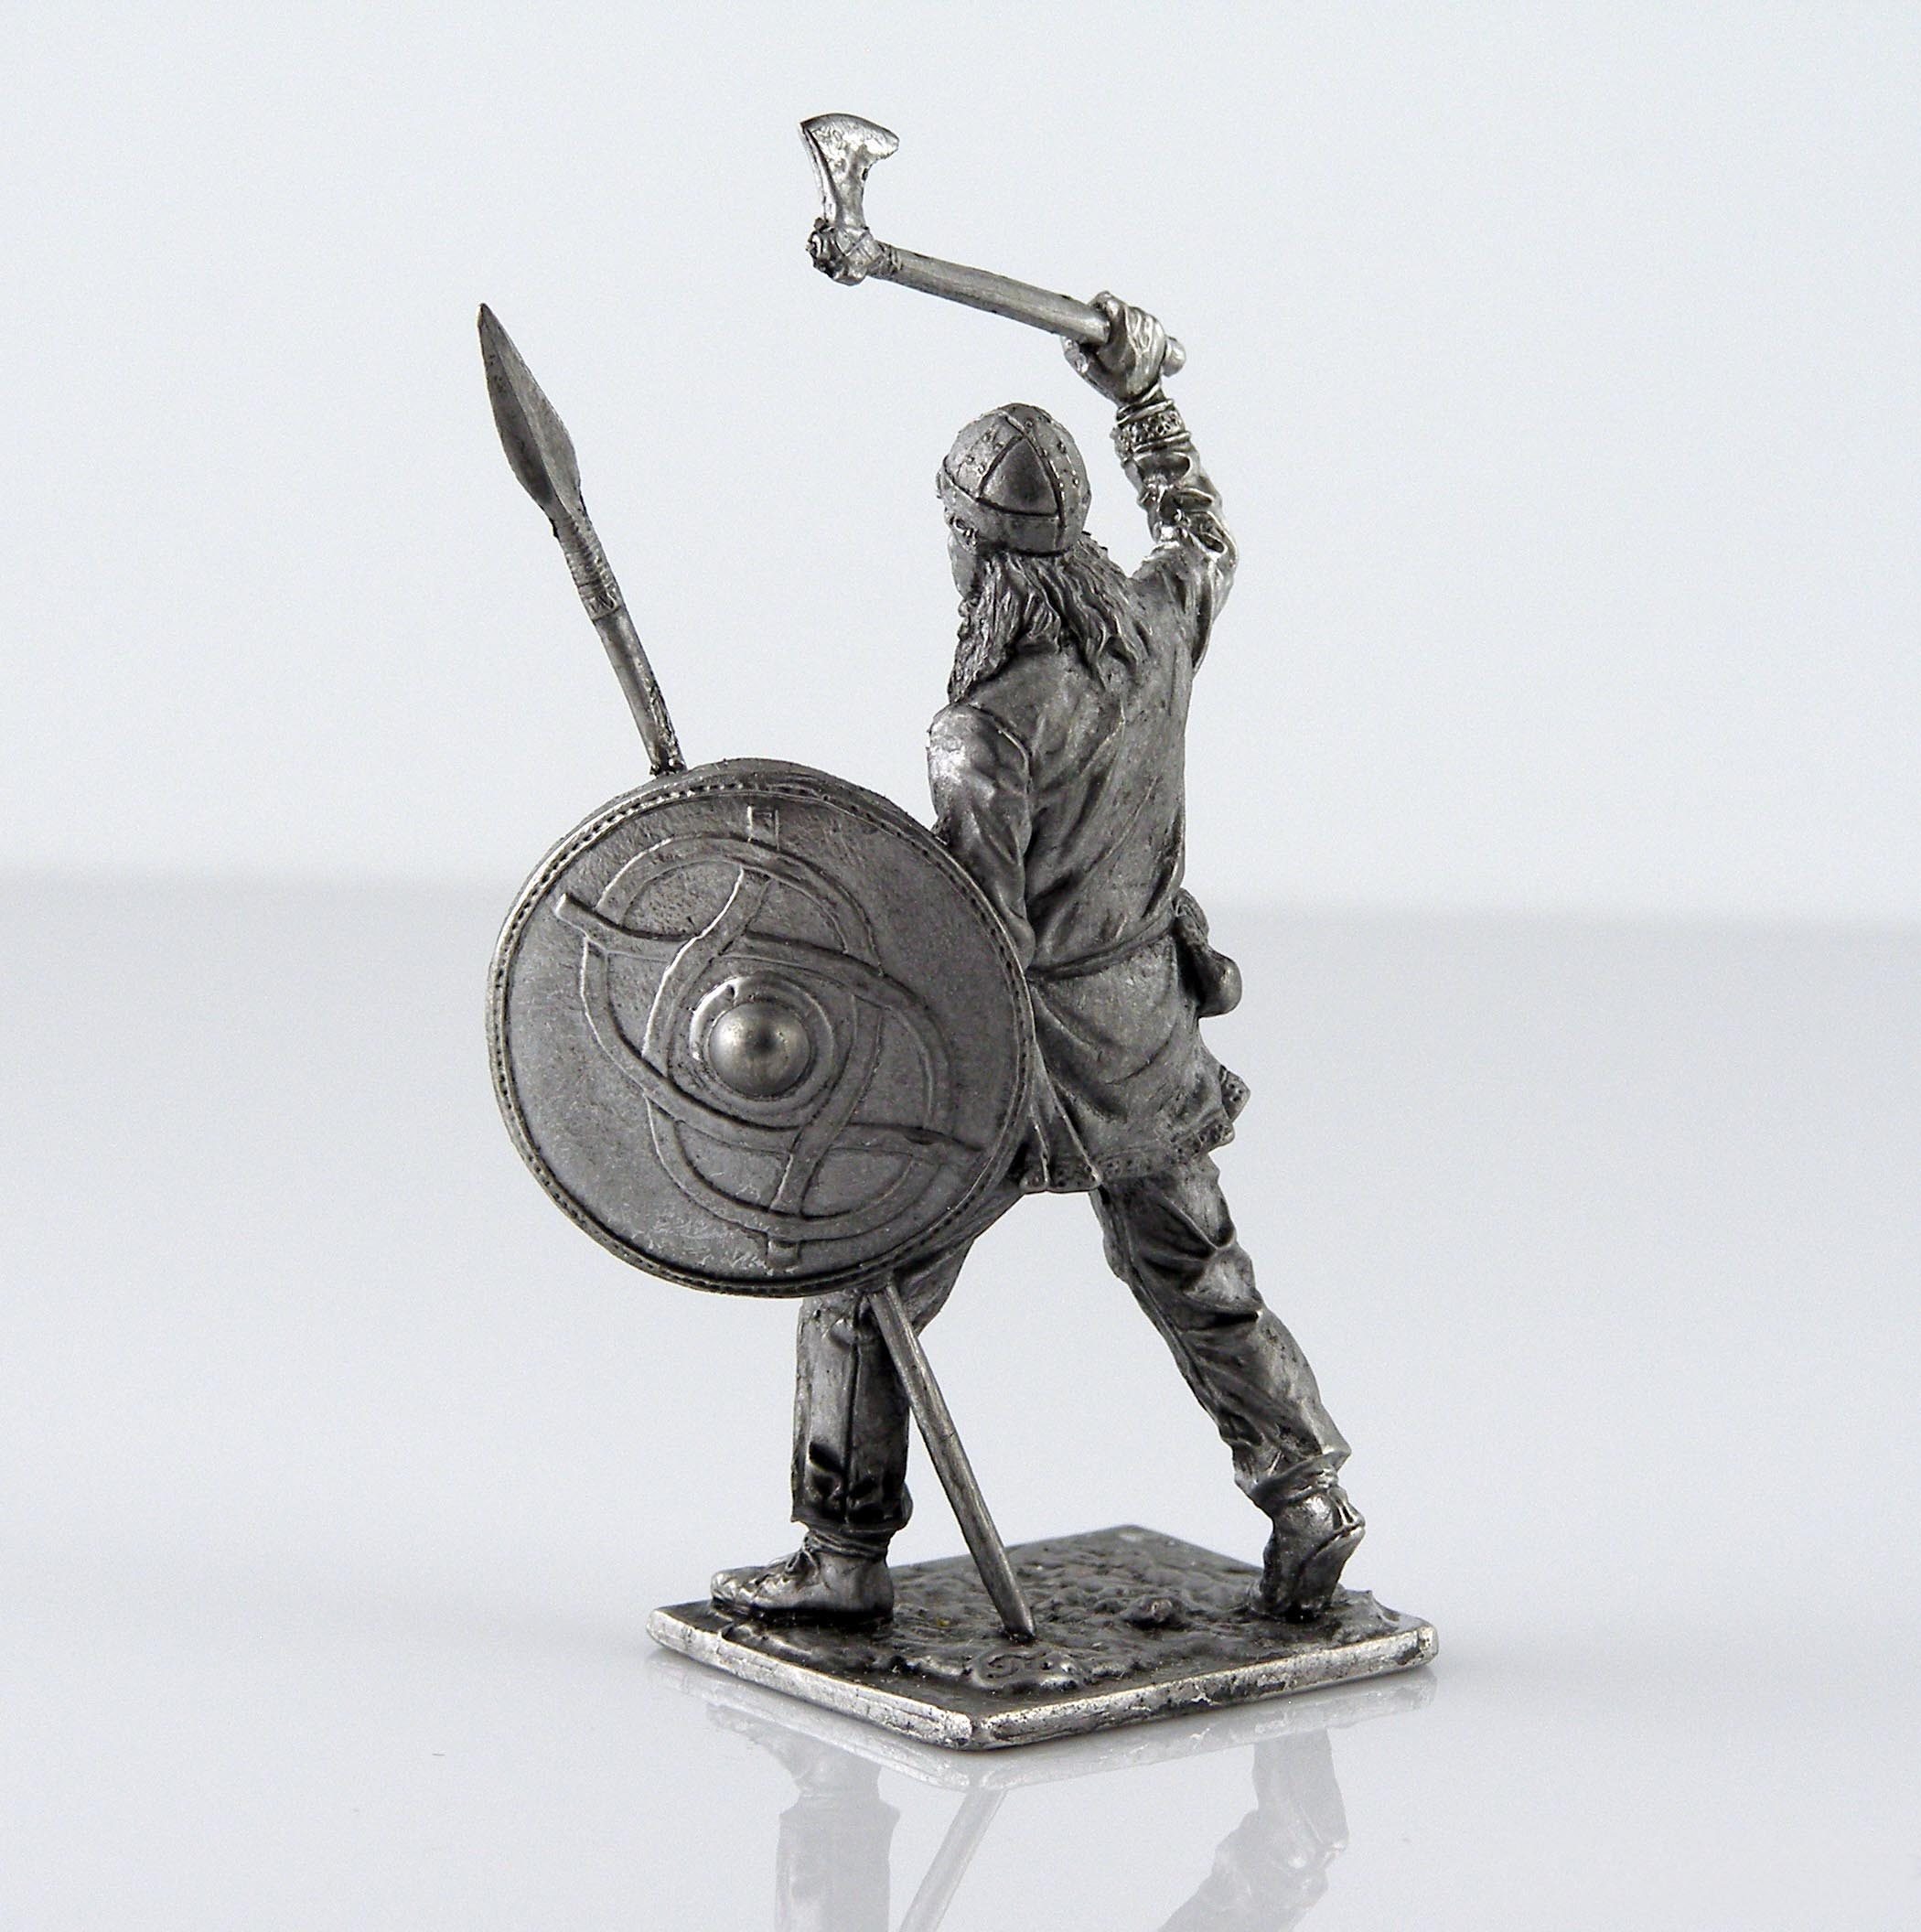 54mm miniature metal sculpture Viking with axe 9-10 century Tin toy soldier 